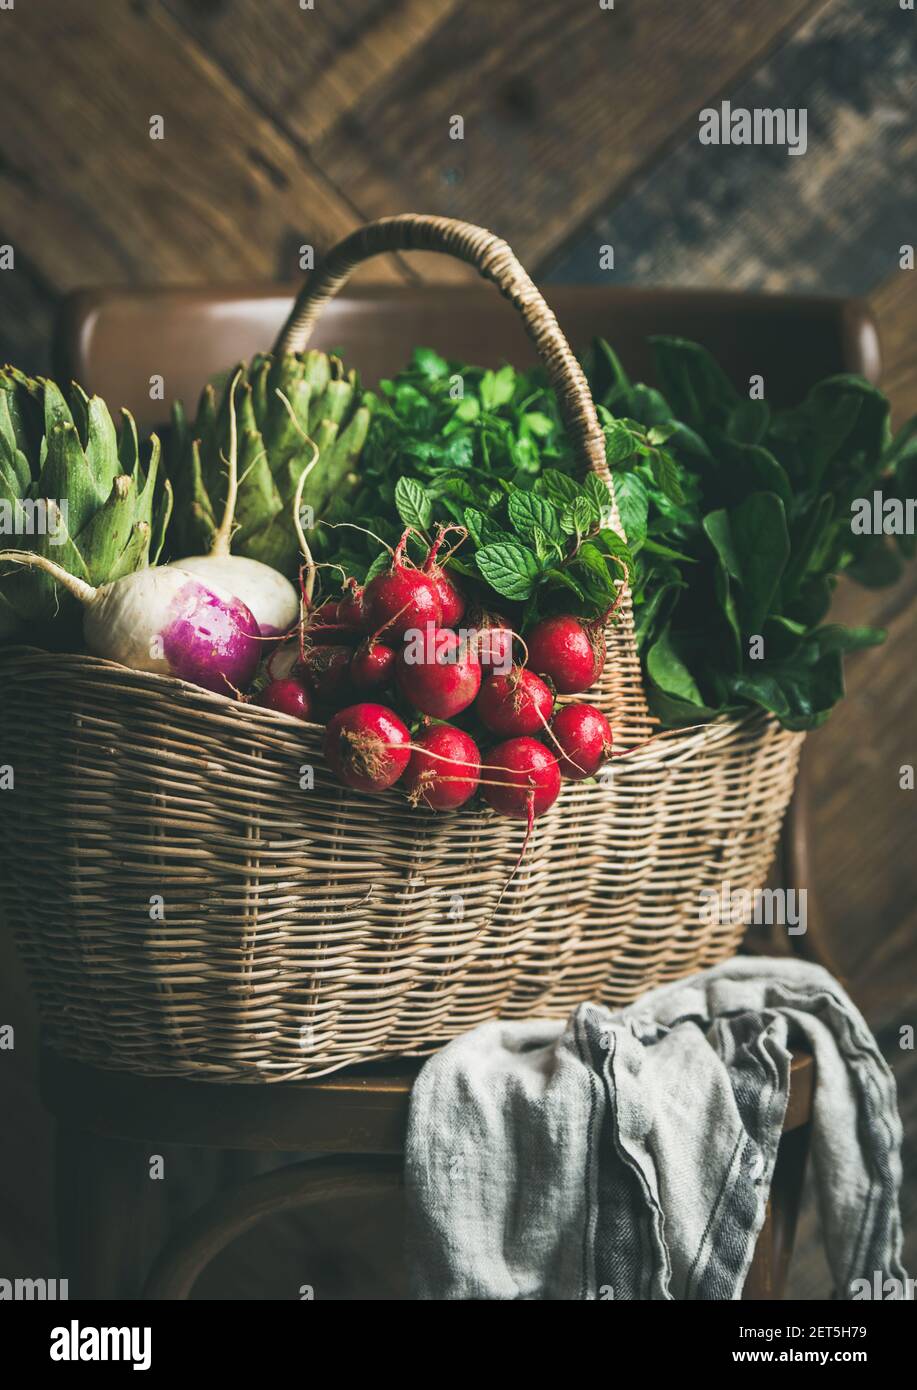 Basket of fresh organic garden vegetables and greens on chair, rustic wooden wall at background Stock Photo